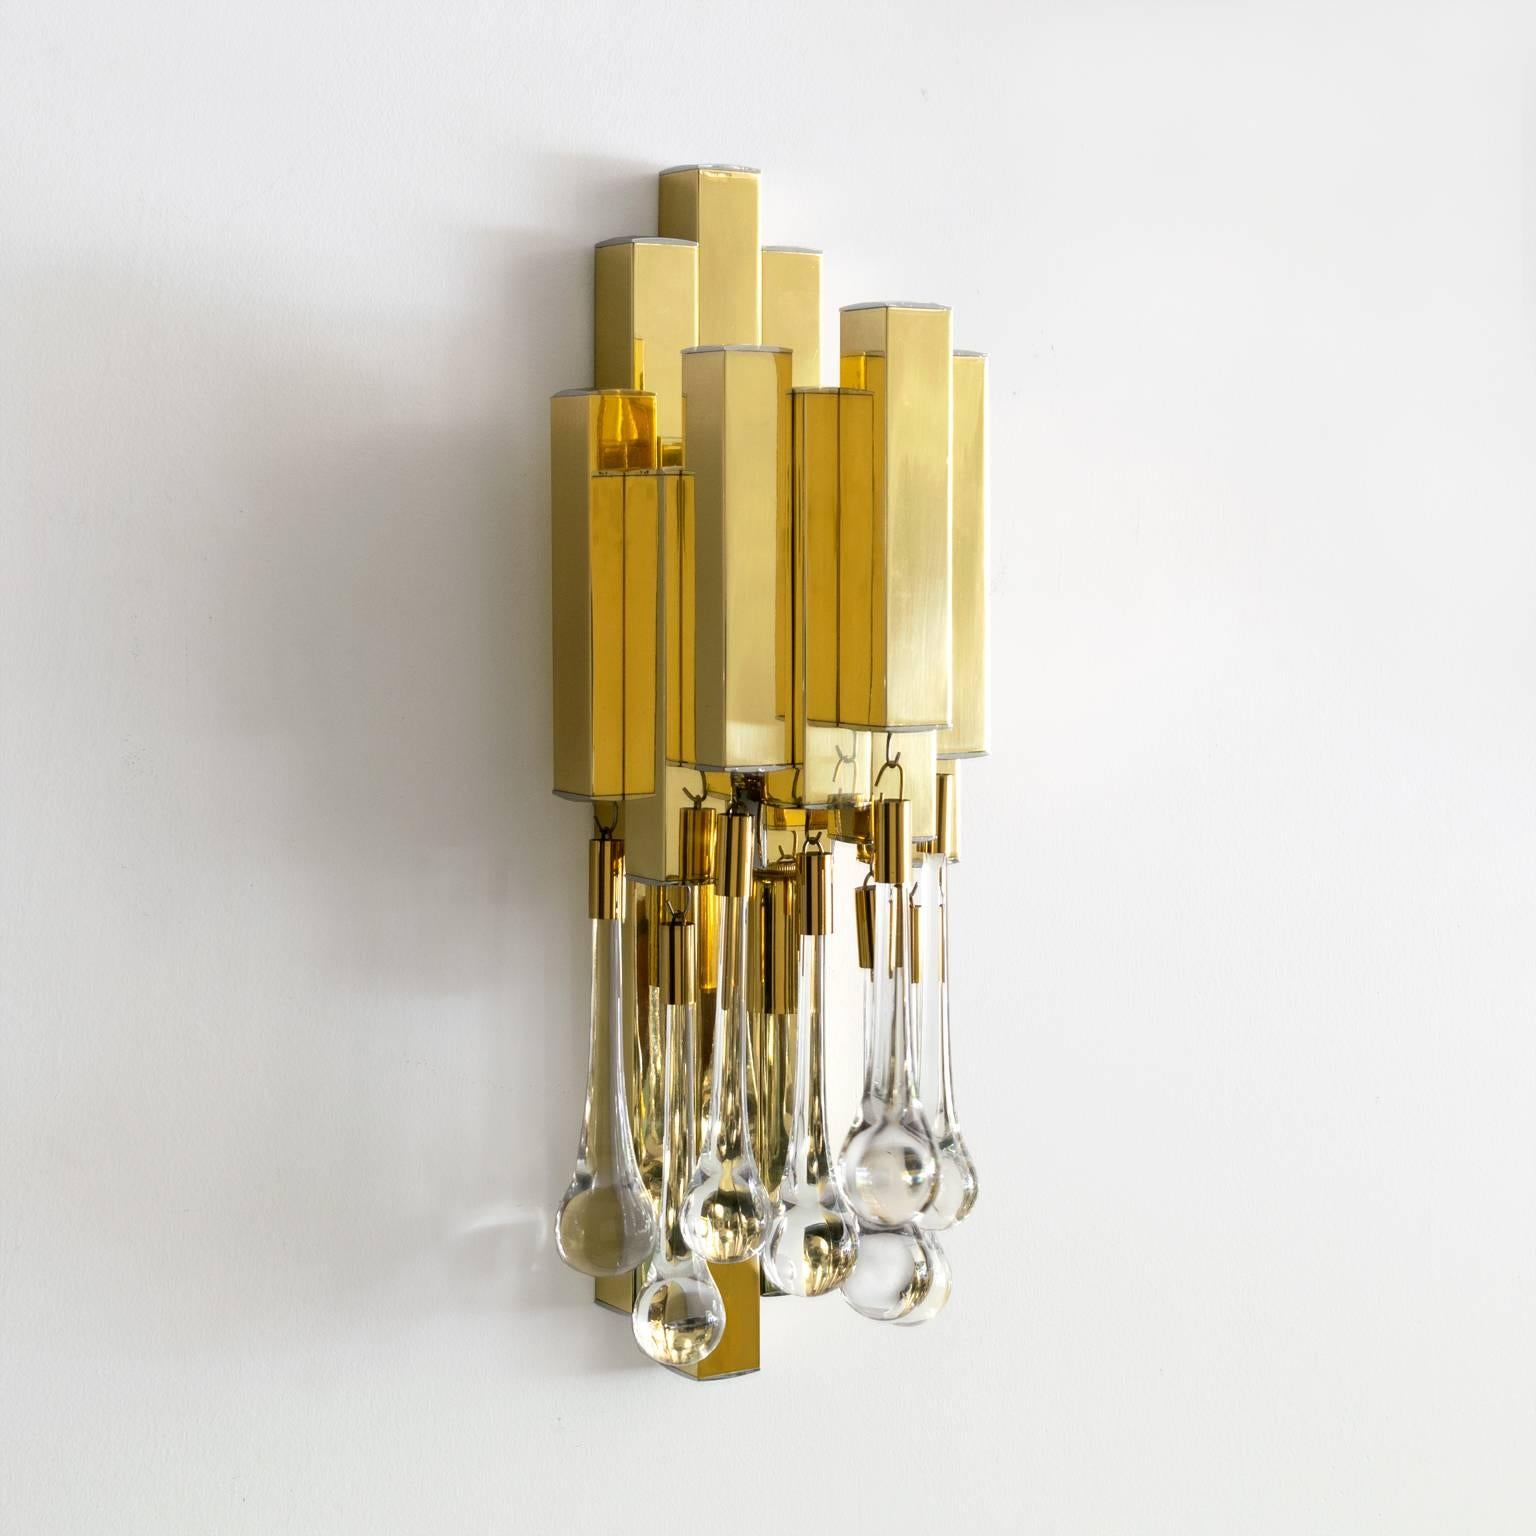 Pair of Mid-Century Modern Brass and Crystal Sconces by Lumica, Barcelona Spain In Excellent Condition For Sale In New York, NY